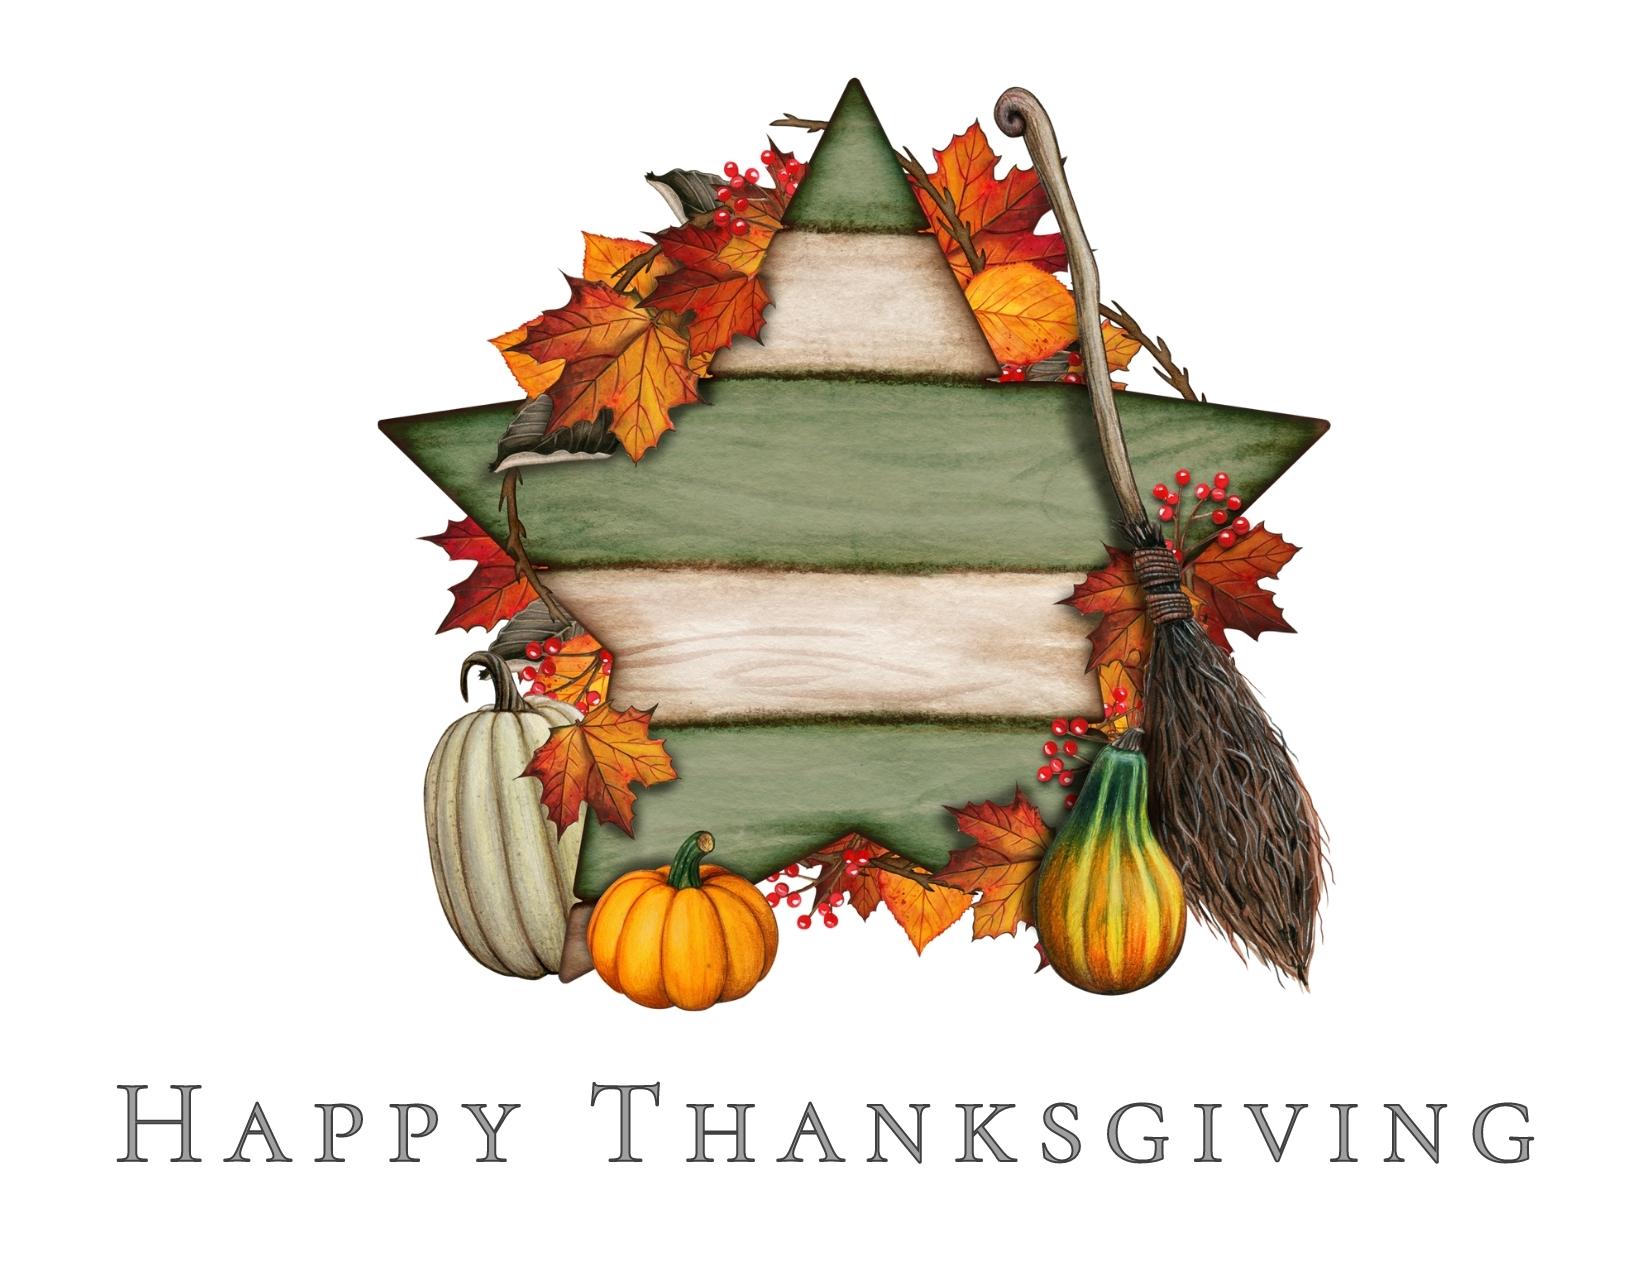 Thanksgiving Cards - Free Printables To Send A Thanksgiving Greeting